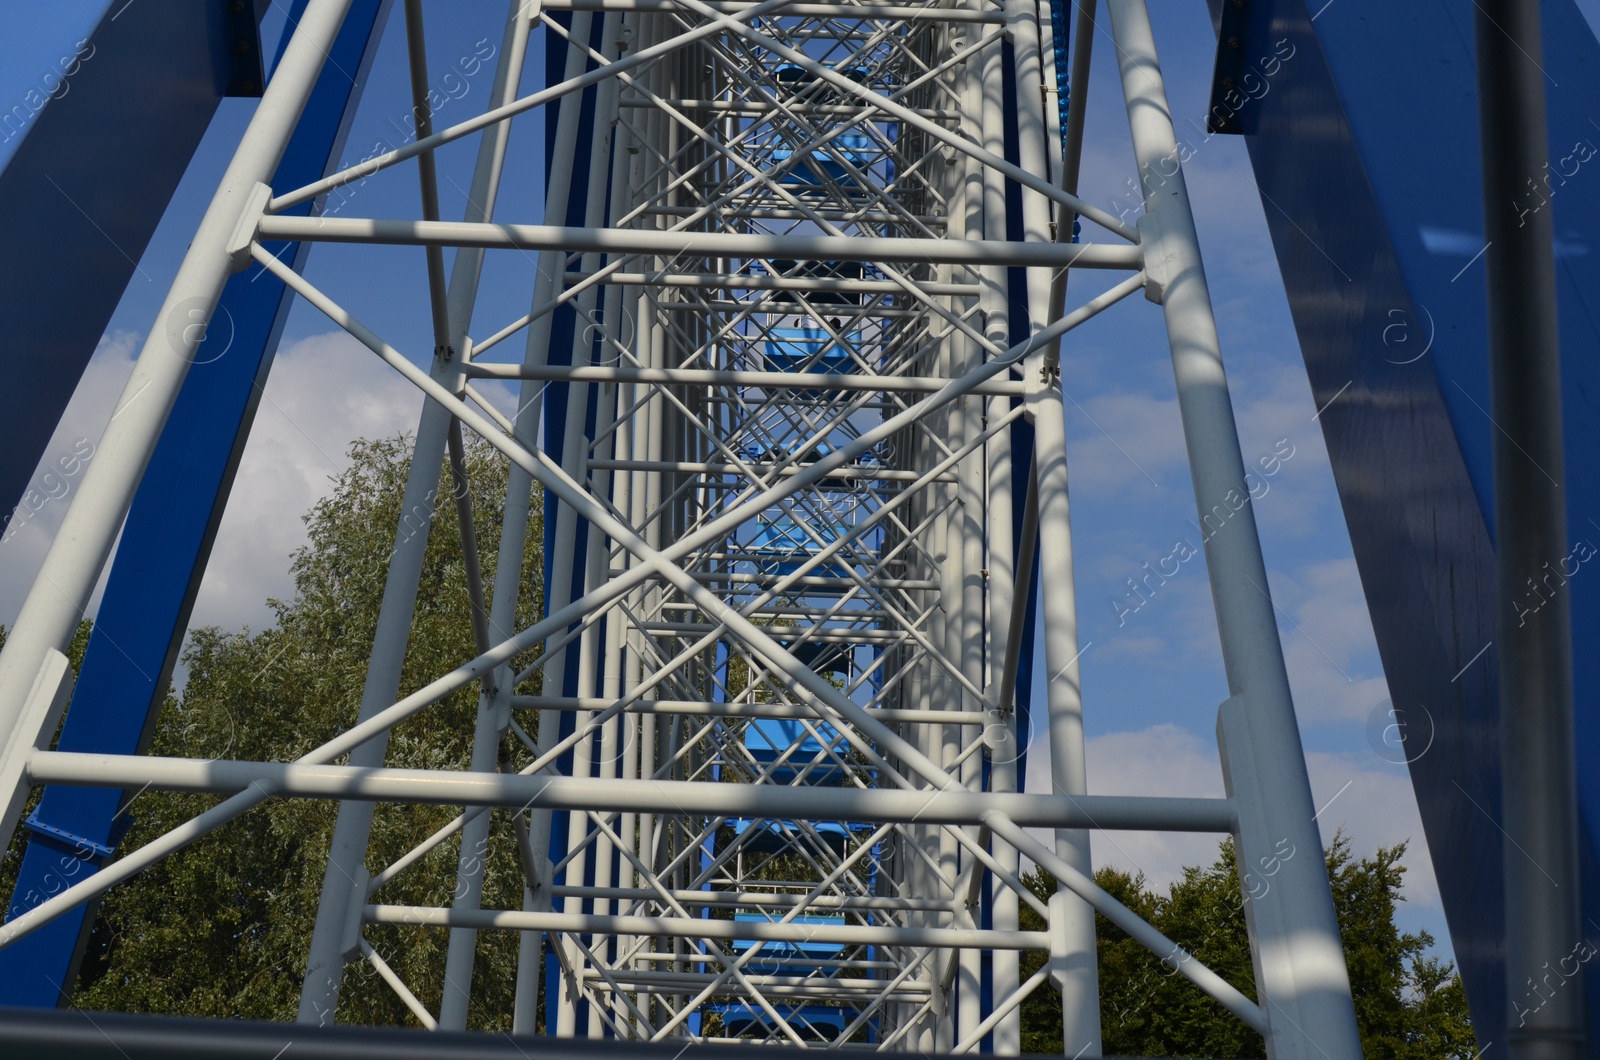 Photo of Large Ferris wheel with blue cabins in amusement park.